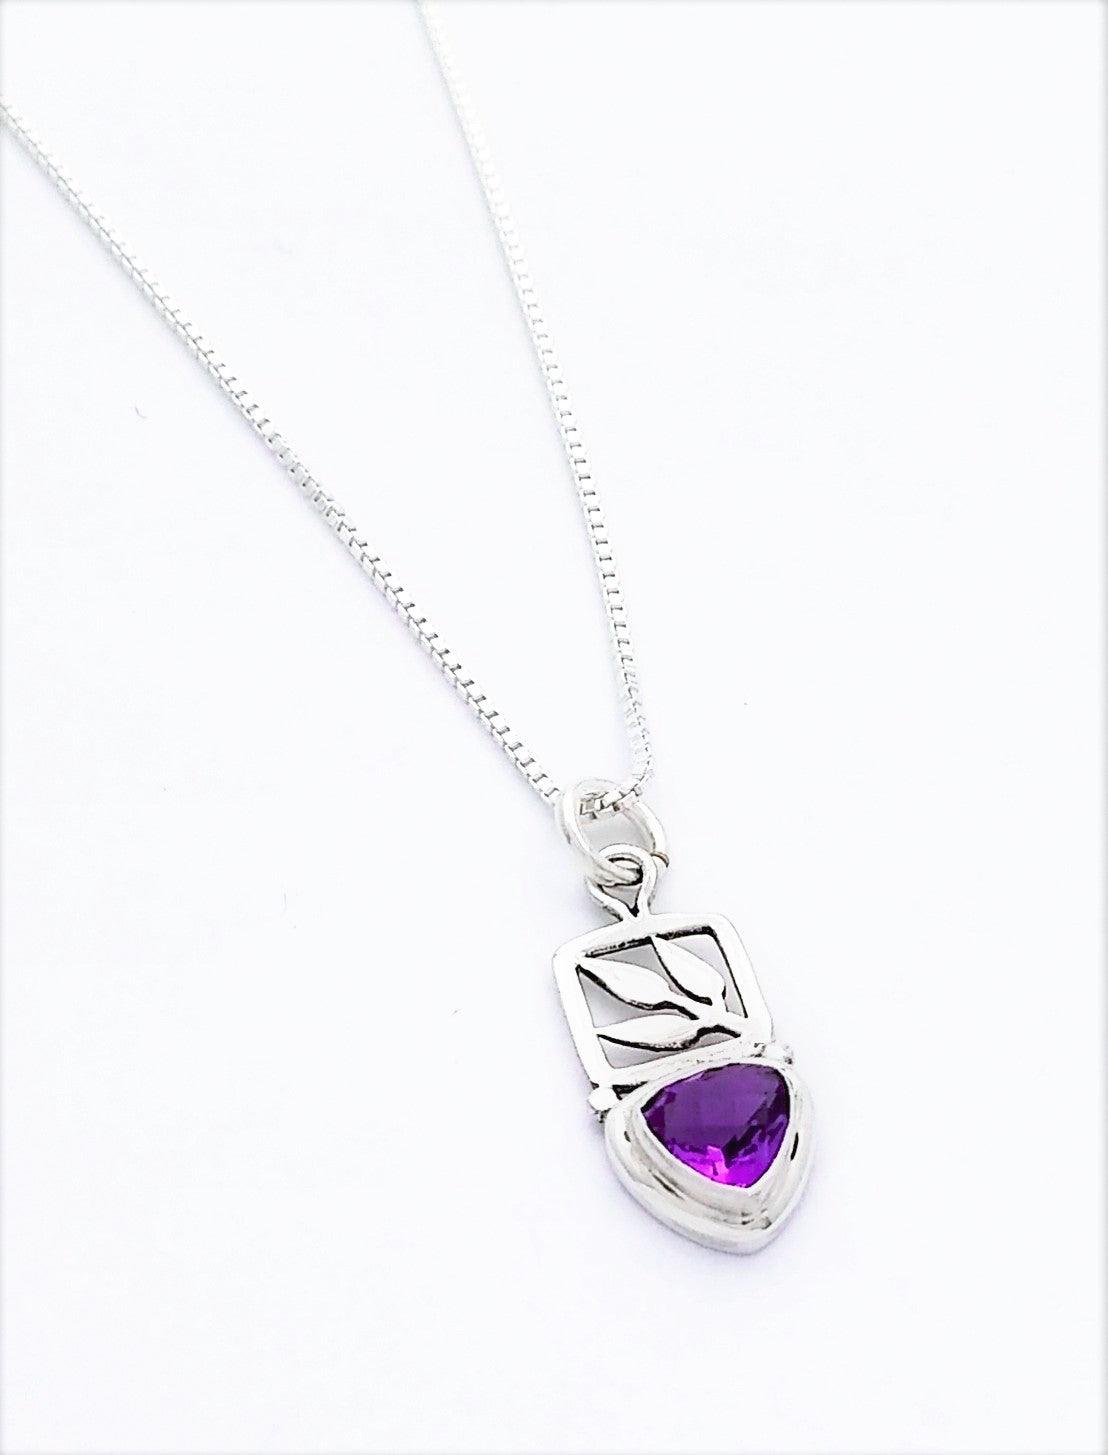 Sterling silver leaf cut out pendant with a small teardrop-shaped amethyst stone at the bottom